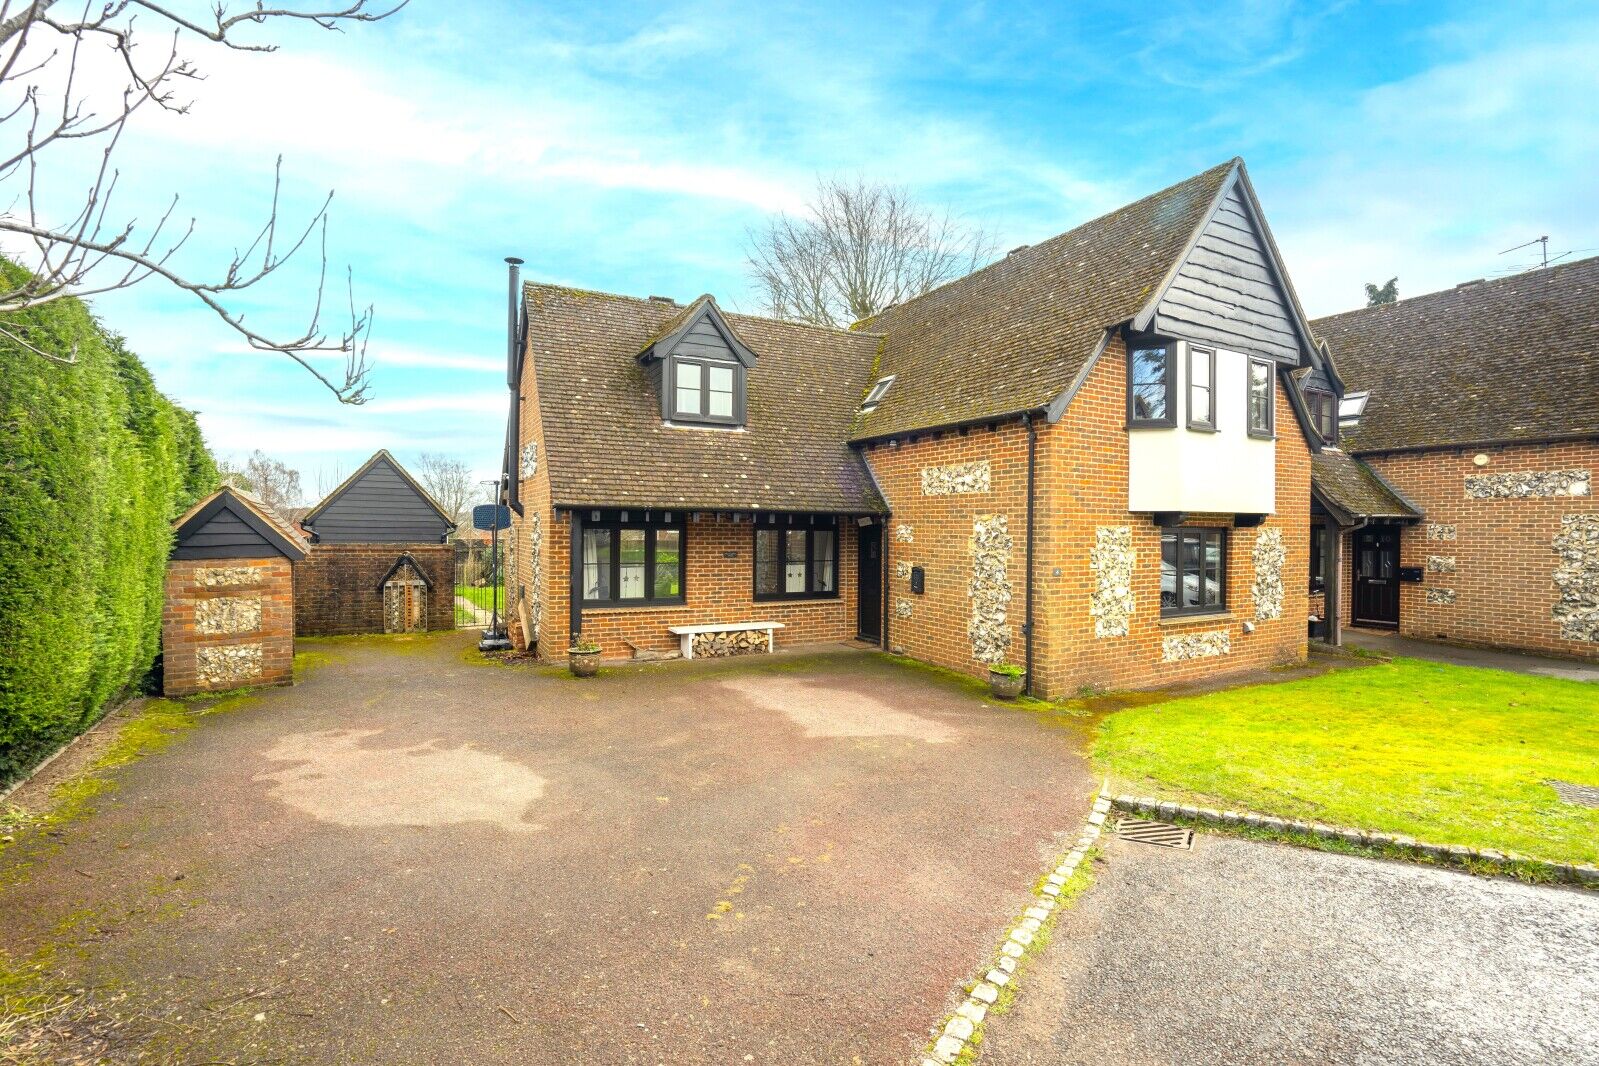 5 bedroom detached house for sale Turners Drive, High Wycombe, HP13, main image